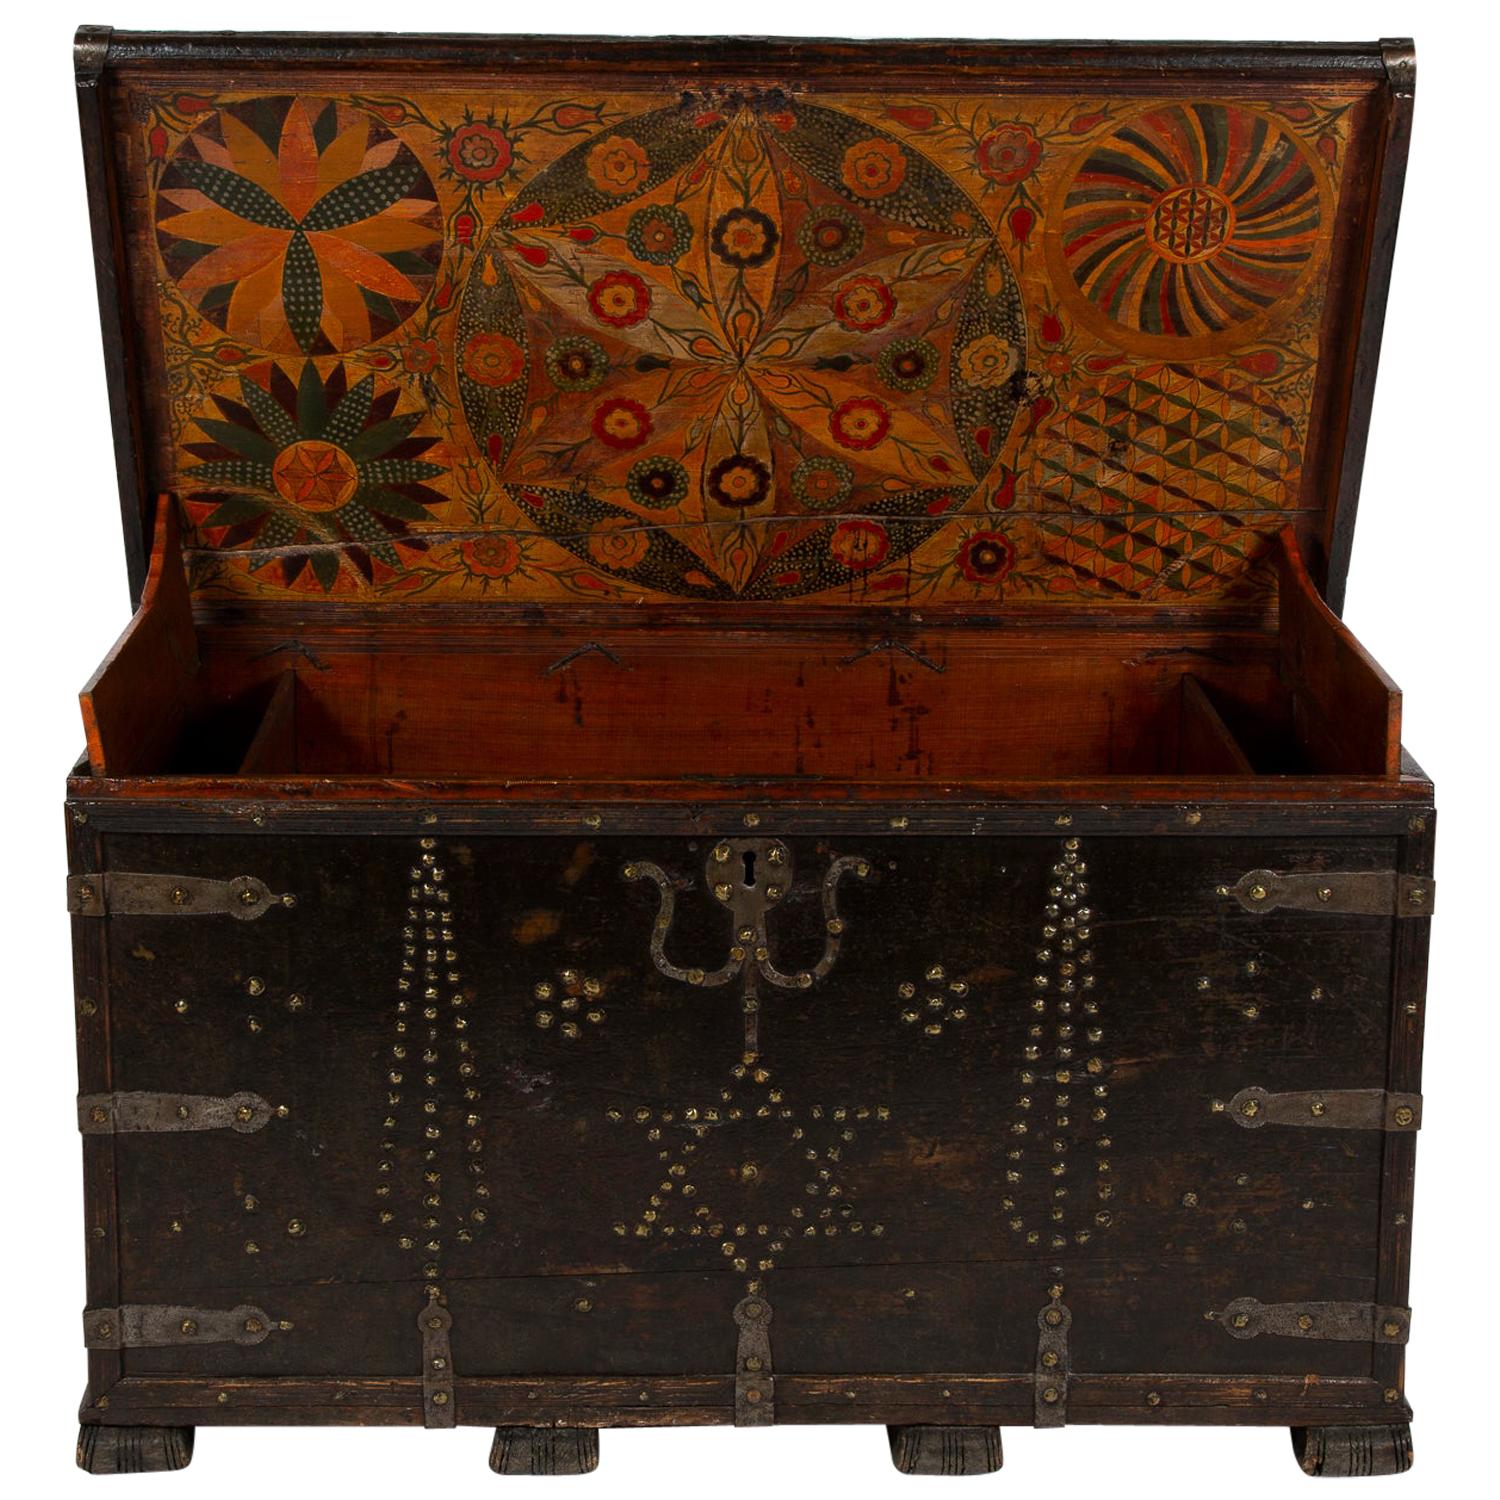 Early 19th Century Northern European Painted Chest